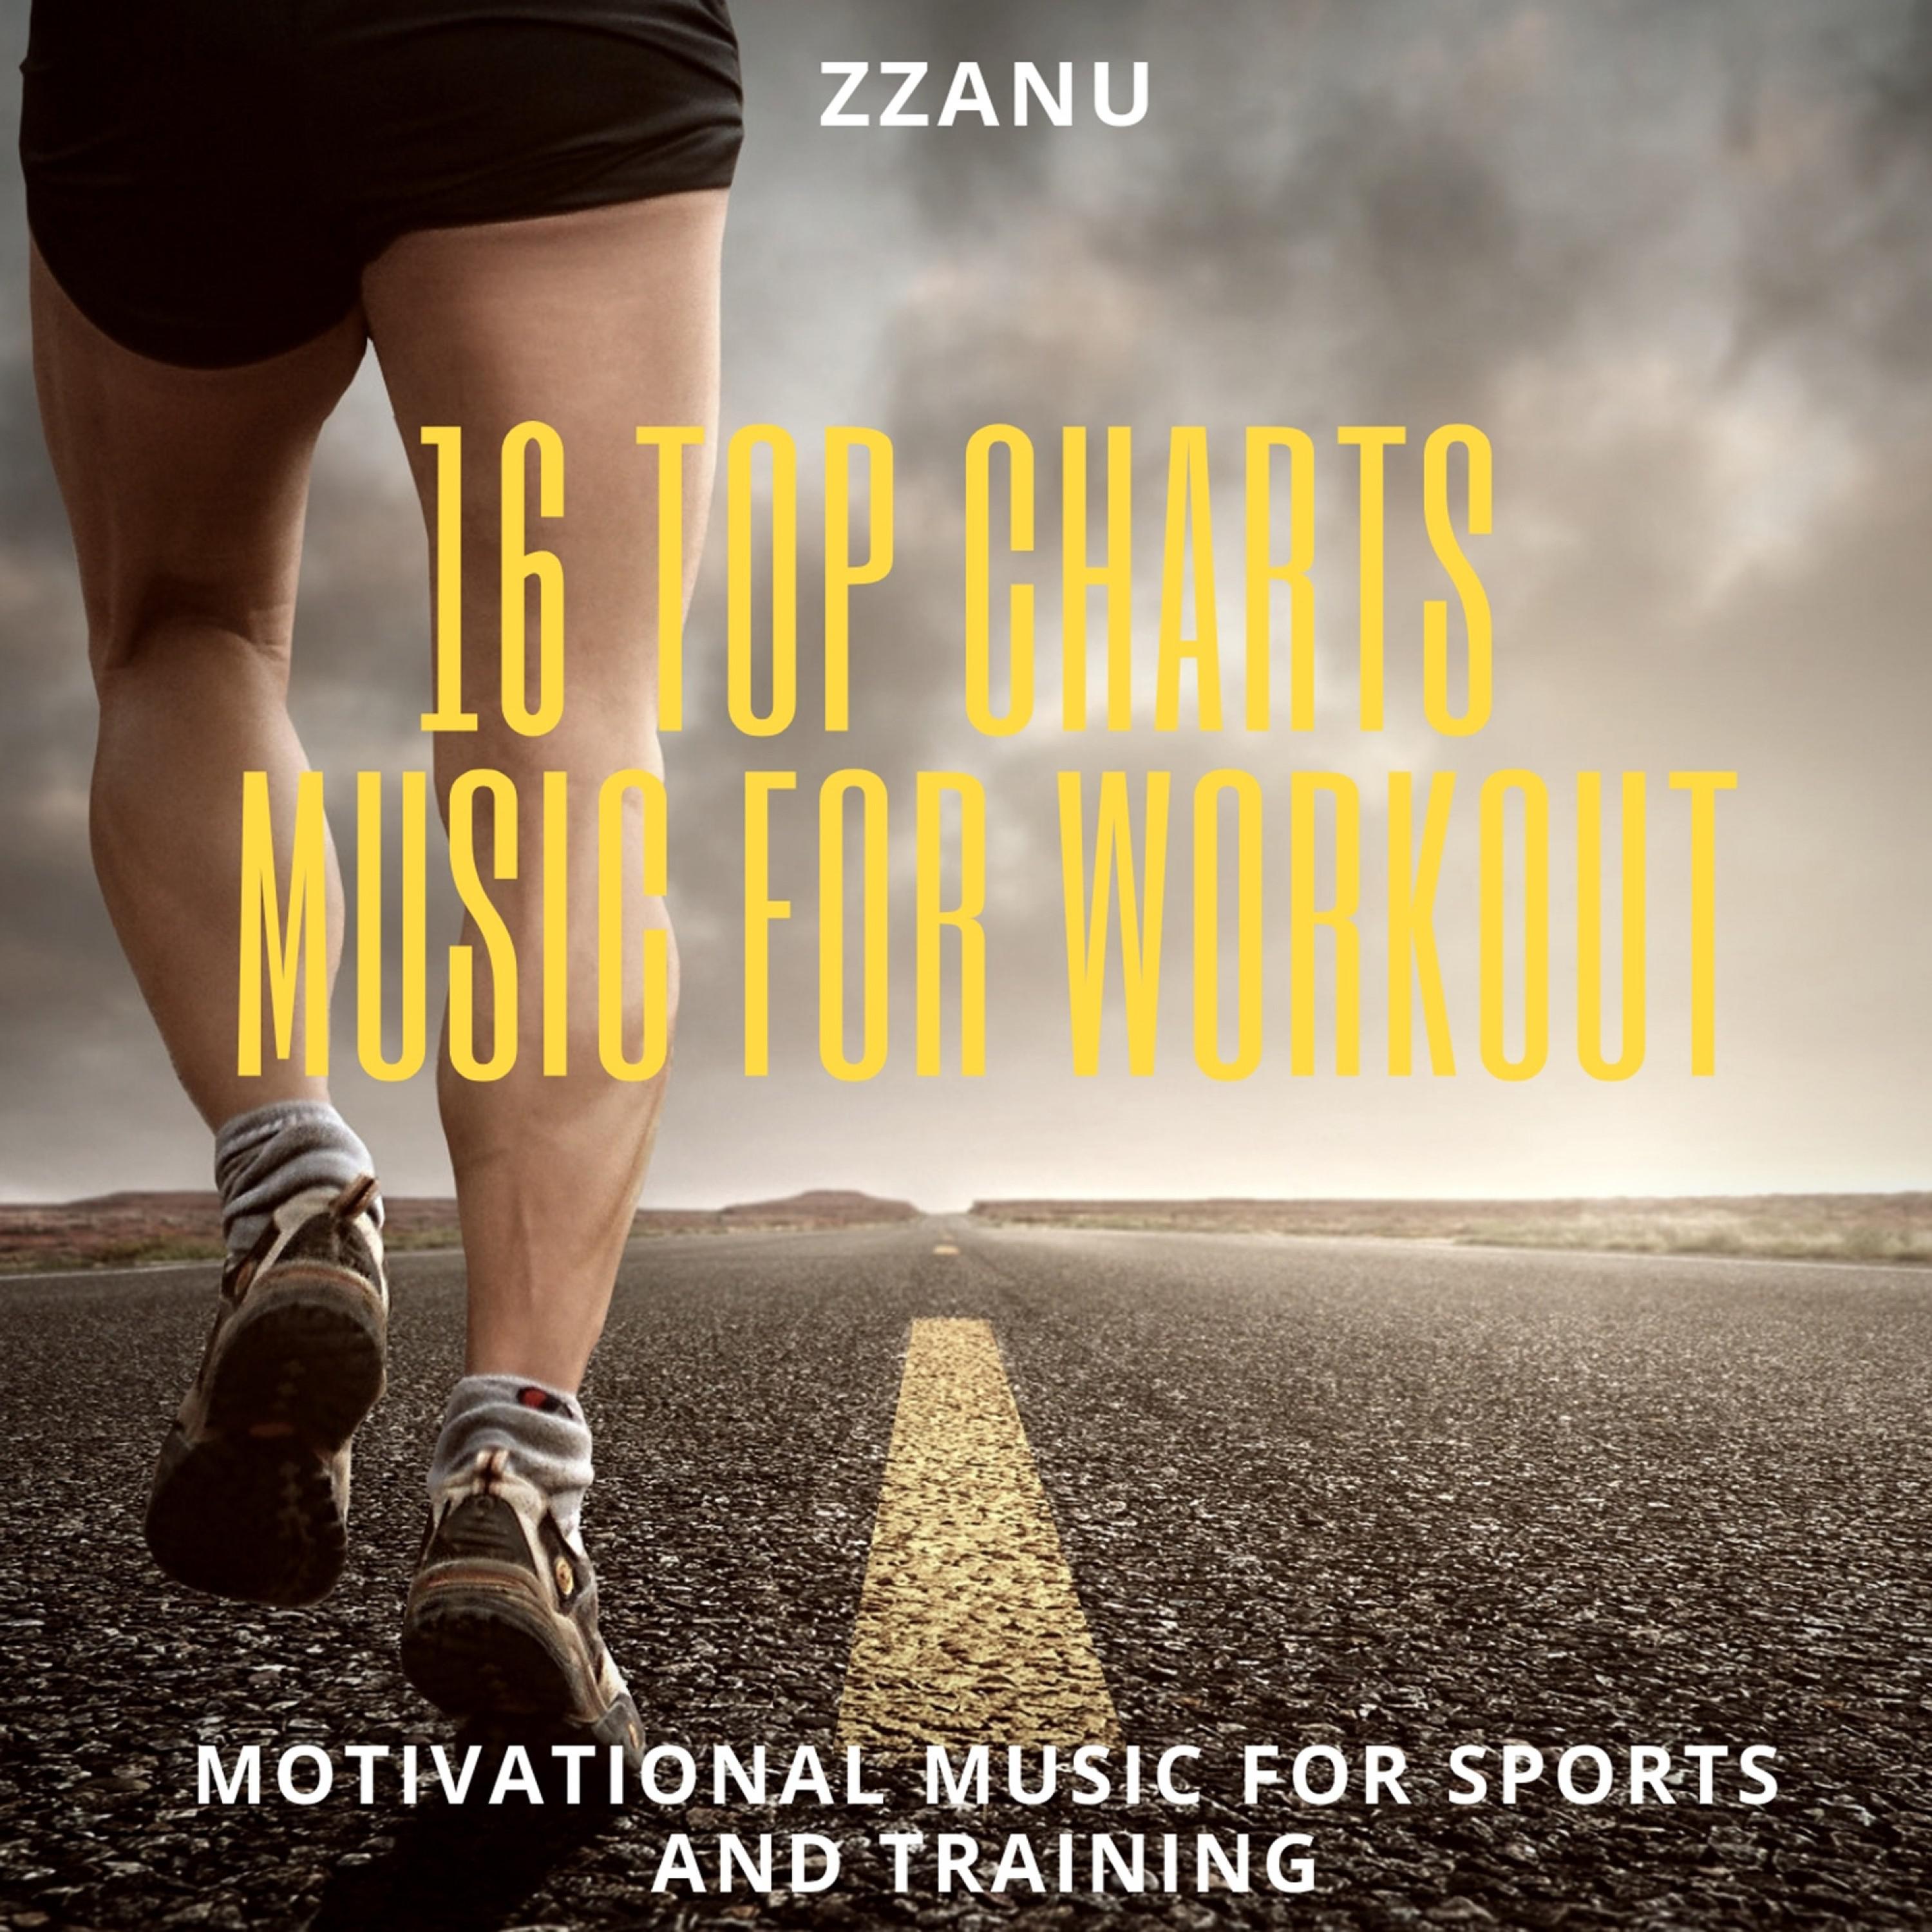 16 Top Charts Music for Workout